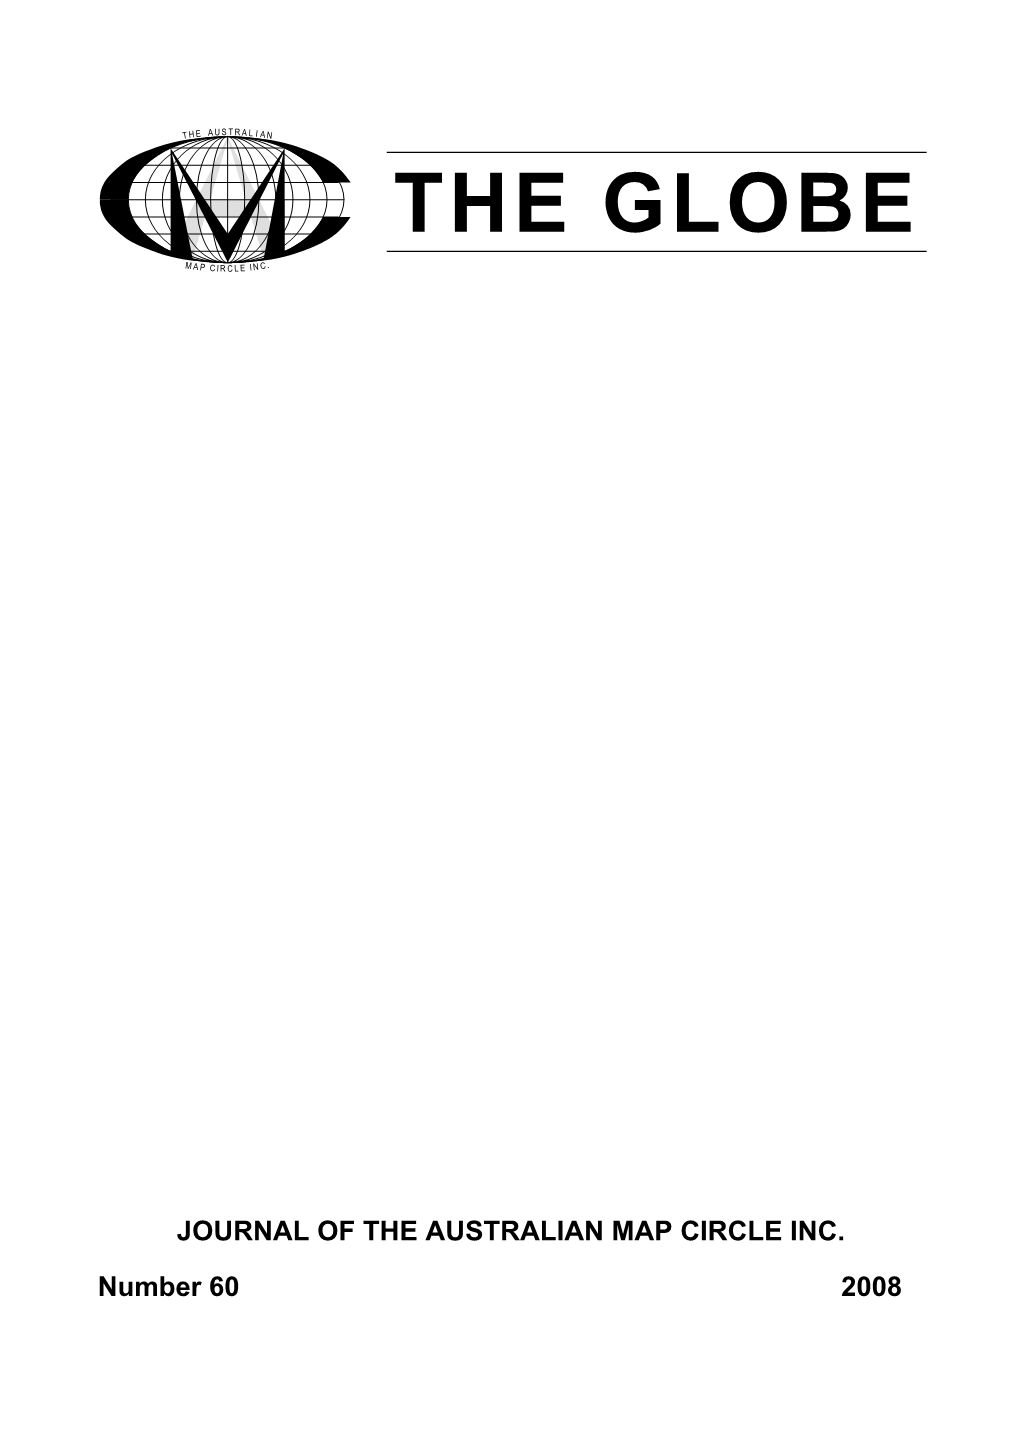 The Globe Index to Issues 1-50